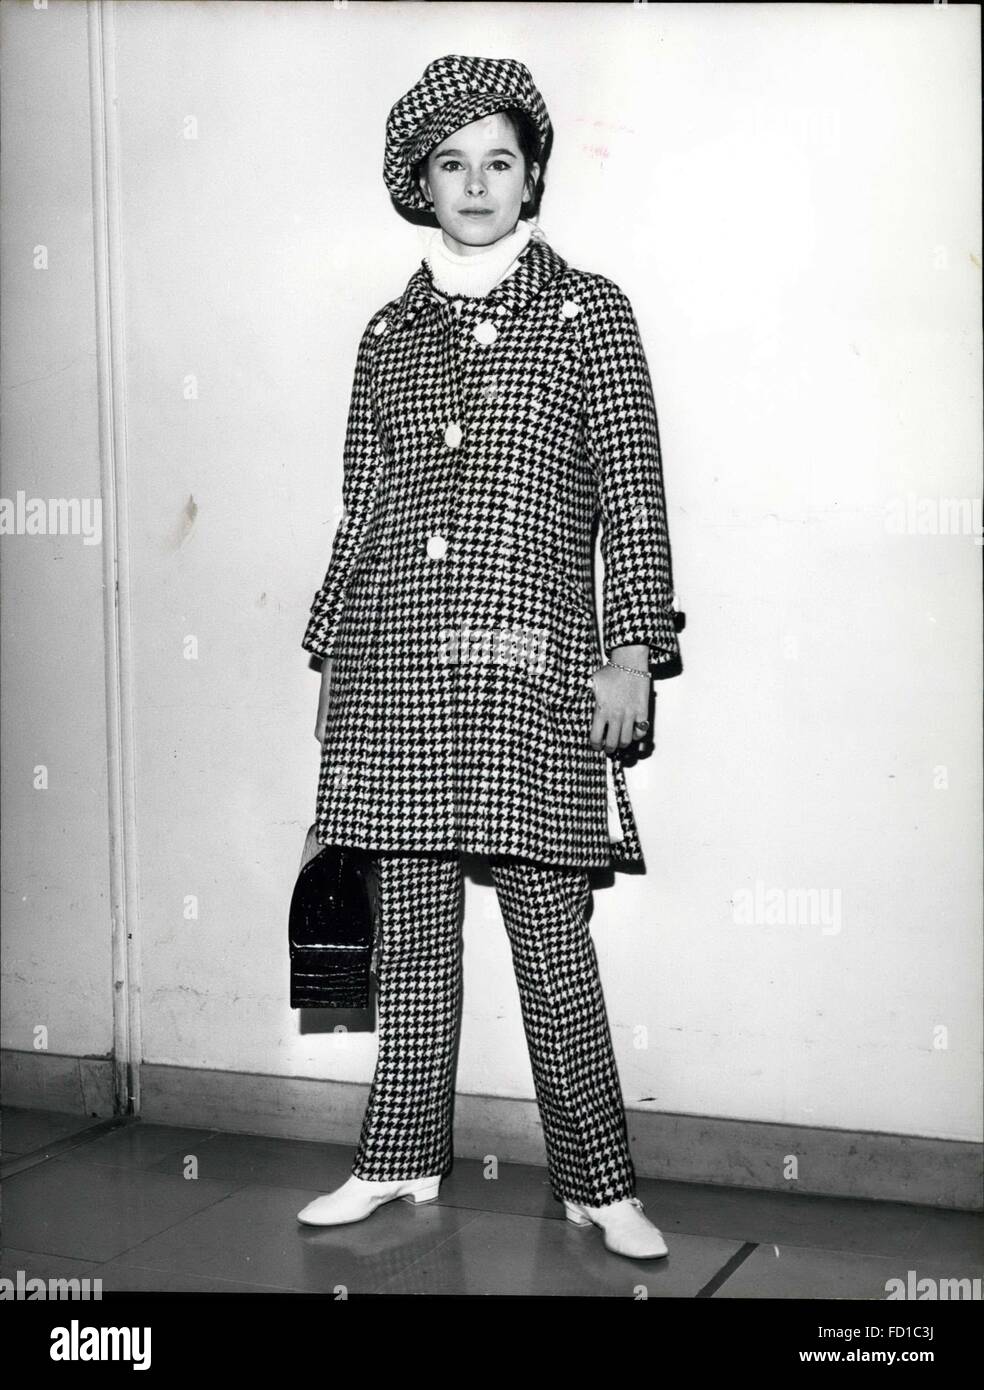 1969 - Off to New York: Geraldine Chaplin, Charlie Chaplin's actress daughter, left for New York this morning. She will attend the World Premier of the film ''Doctor Zhivago'', based on the famous Pastenak's novel in which she plays the role of Zhivago's wife. Photo shows Geraldine Chaplin wearing a checkered travel outfit and a kid cap pictured at Orly Airport prior to boarding the plane. (Credit Image: © Keystone Press Agency/Keystone USA via ZUMAPRESS.com) Stock Photo